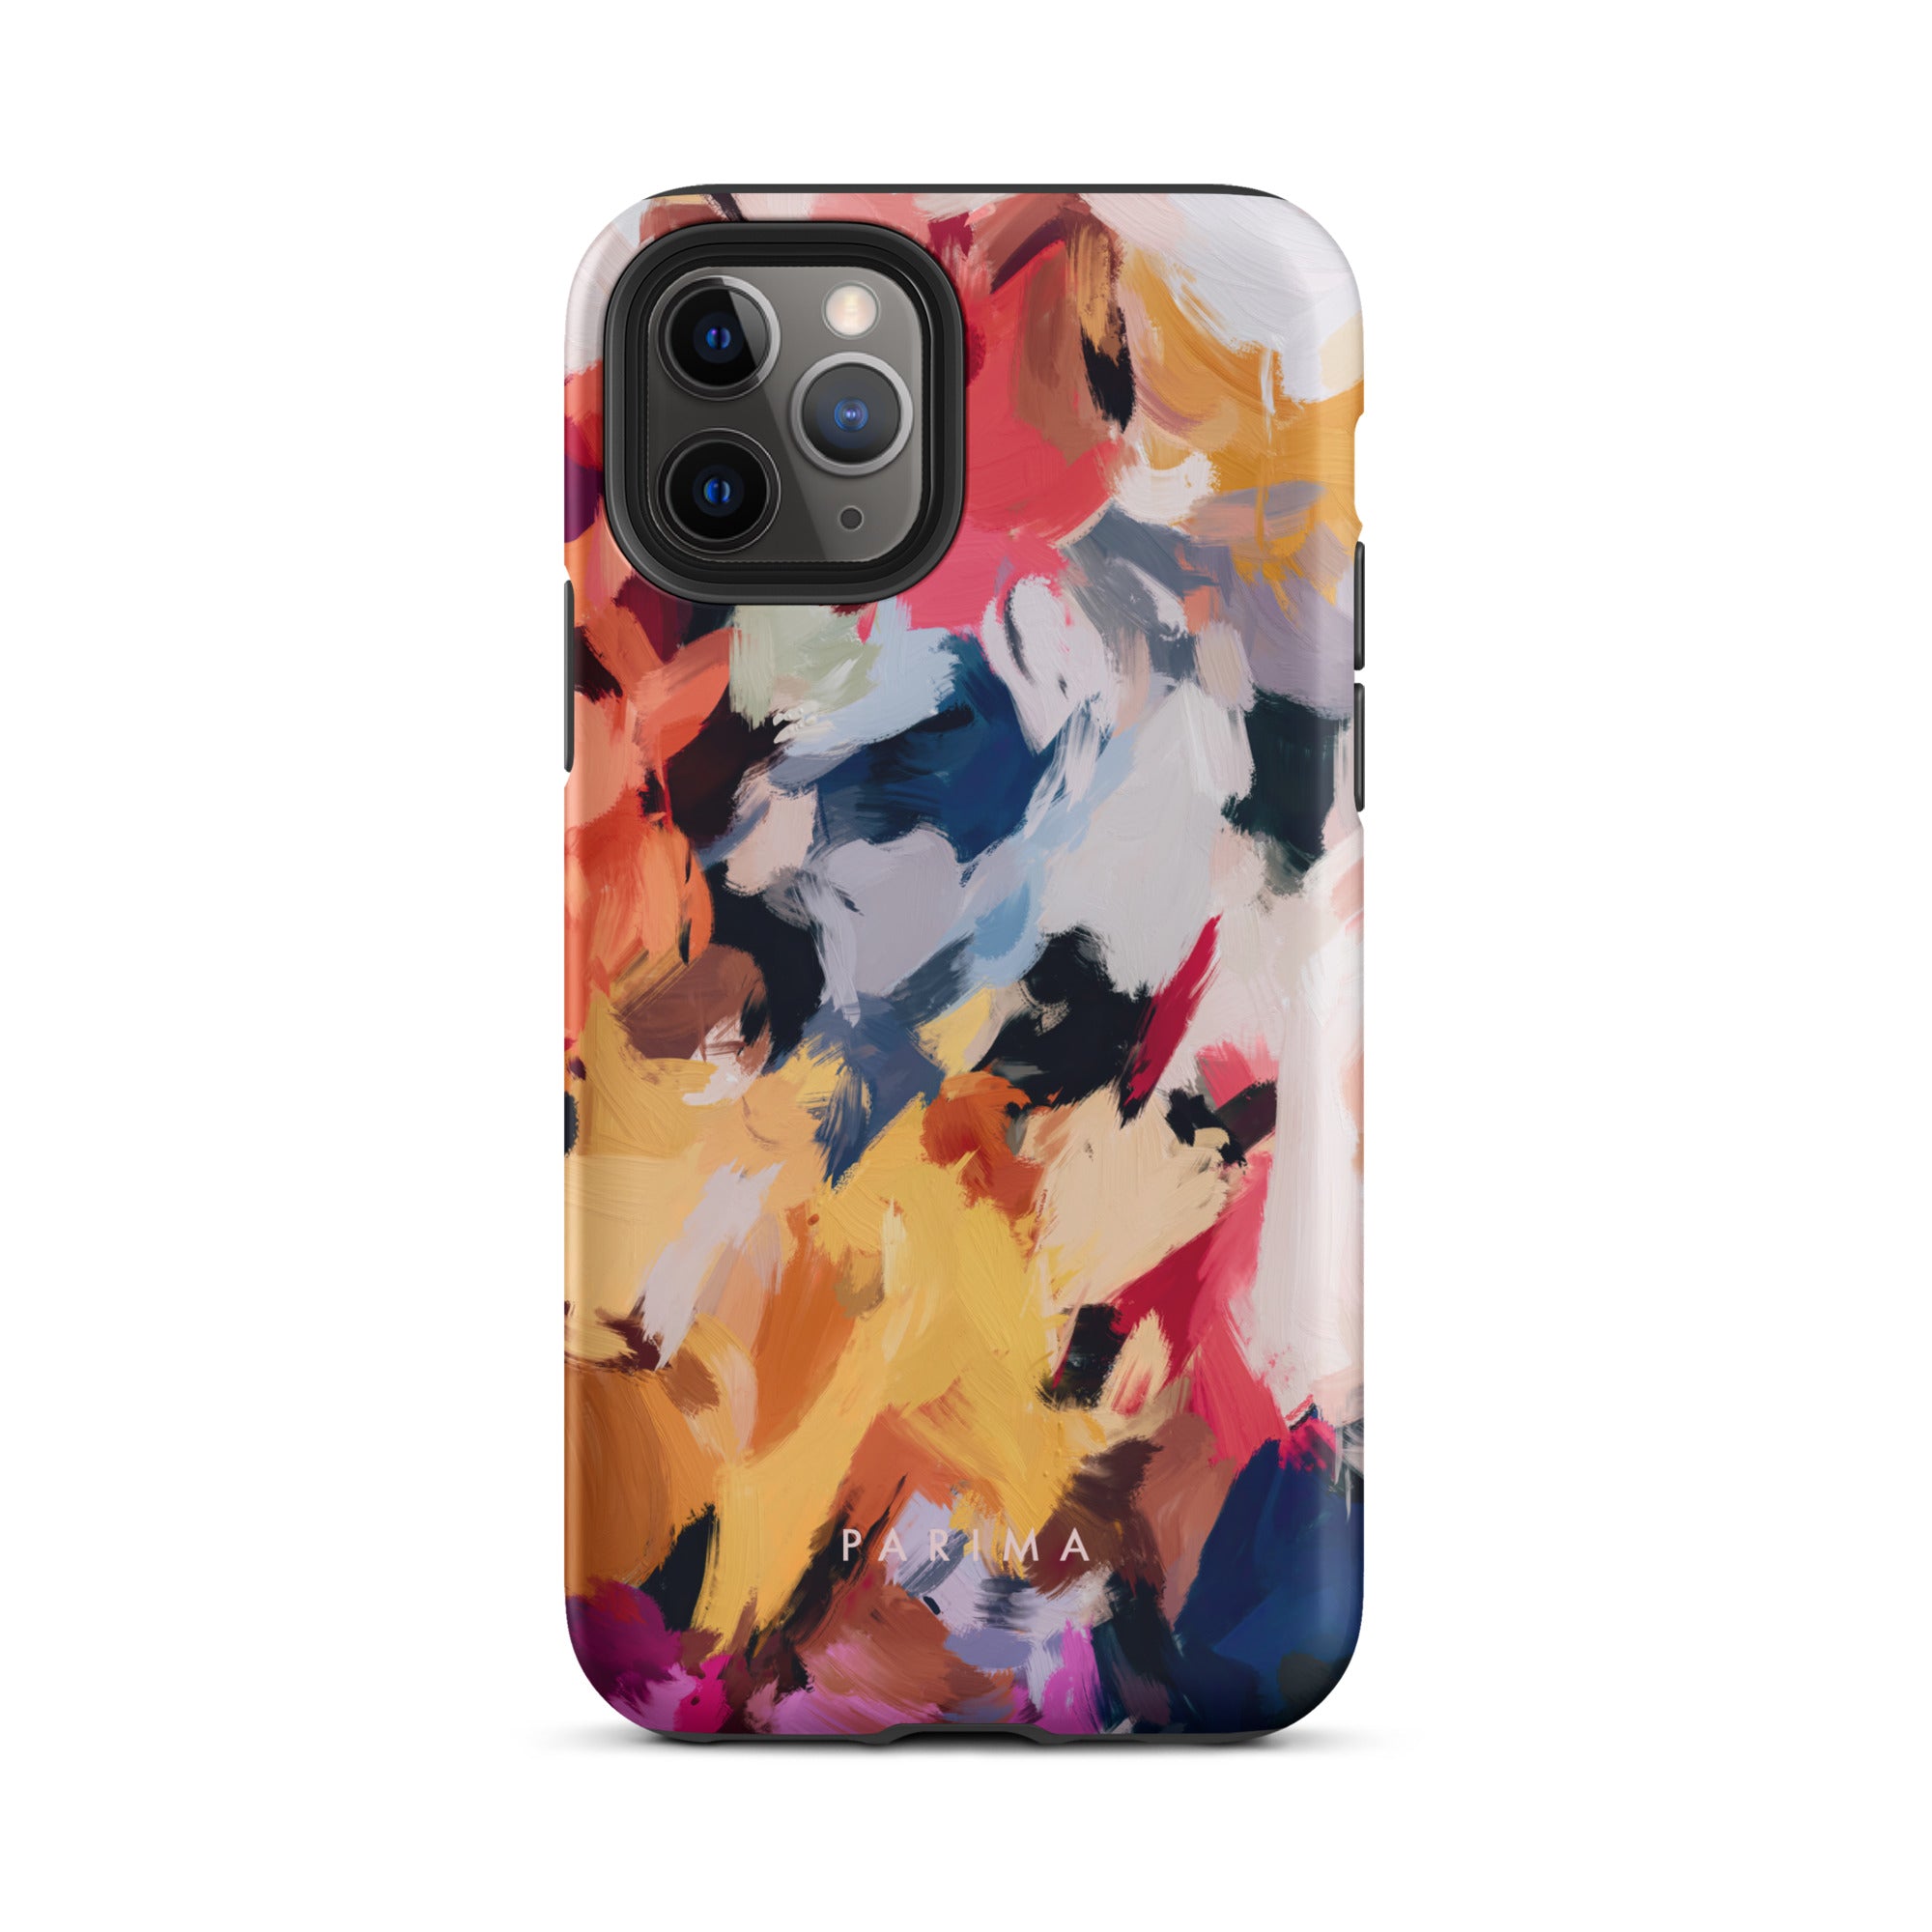 Wilde, blue and yellow abstract art on iPhone 11 Pro tough case by Parima Studio